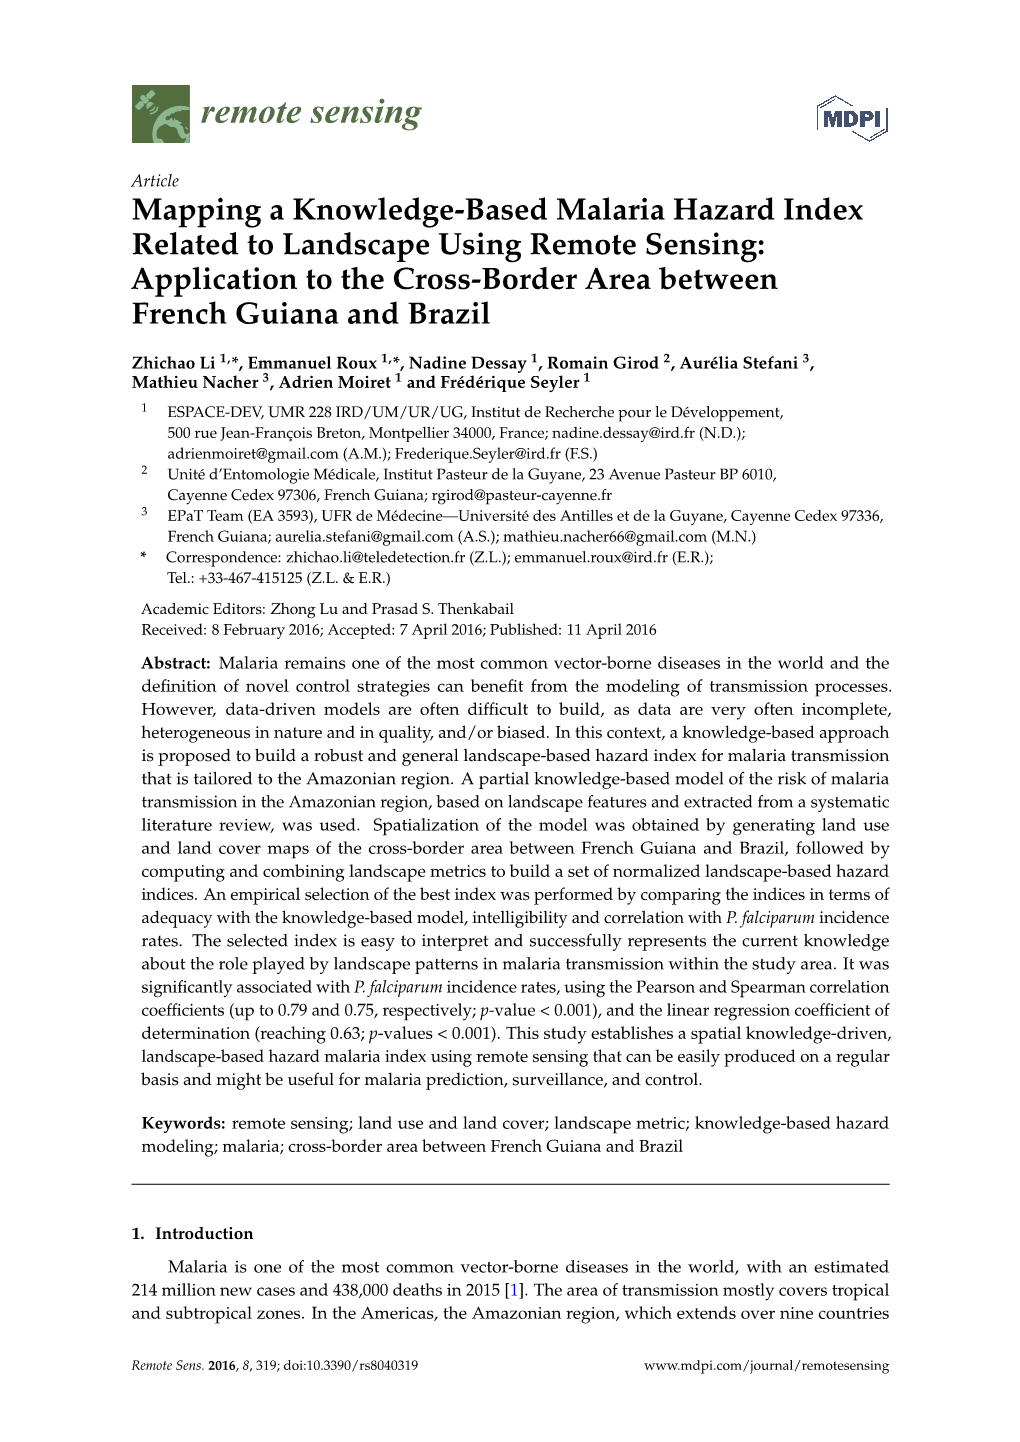 Mapping a Knowledge-Based Malaria Hazard Index Related to Landscape Using Remote Sensing: Application to the Cross-Border Area Between French Guiana and Brazil